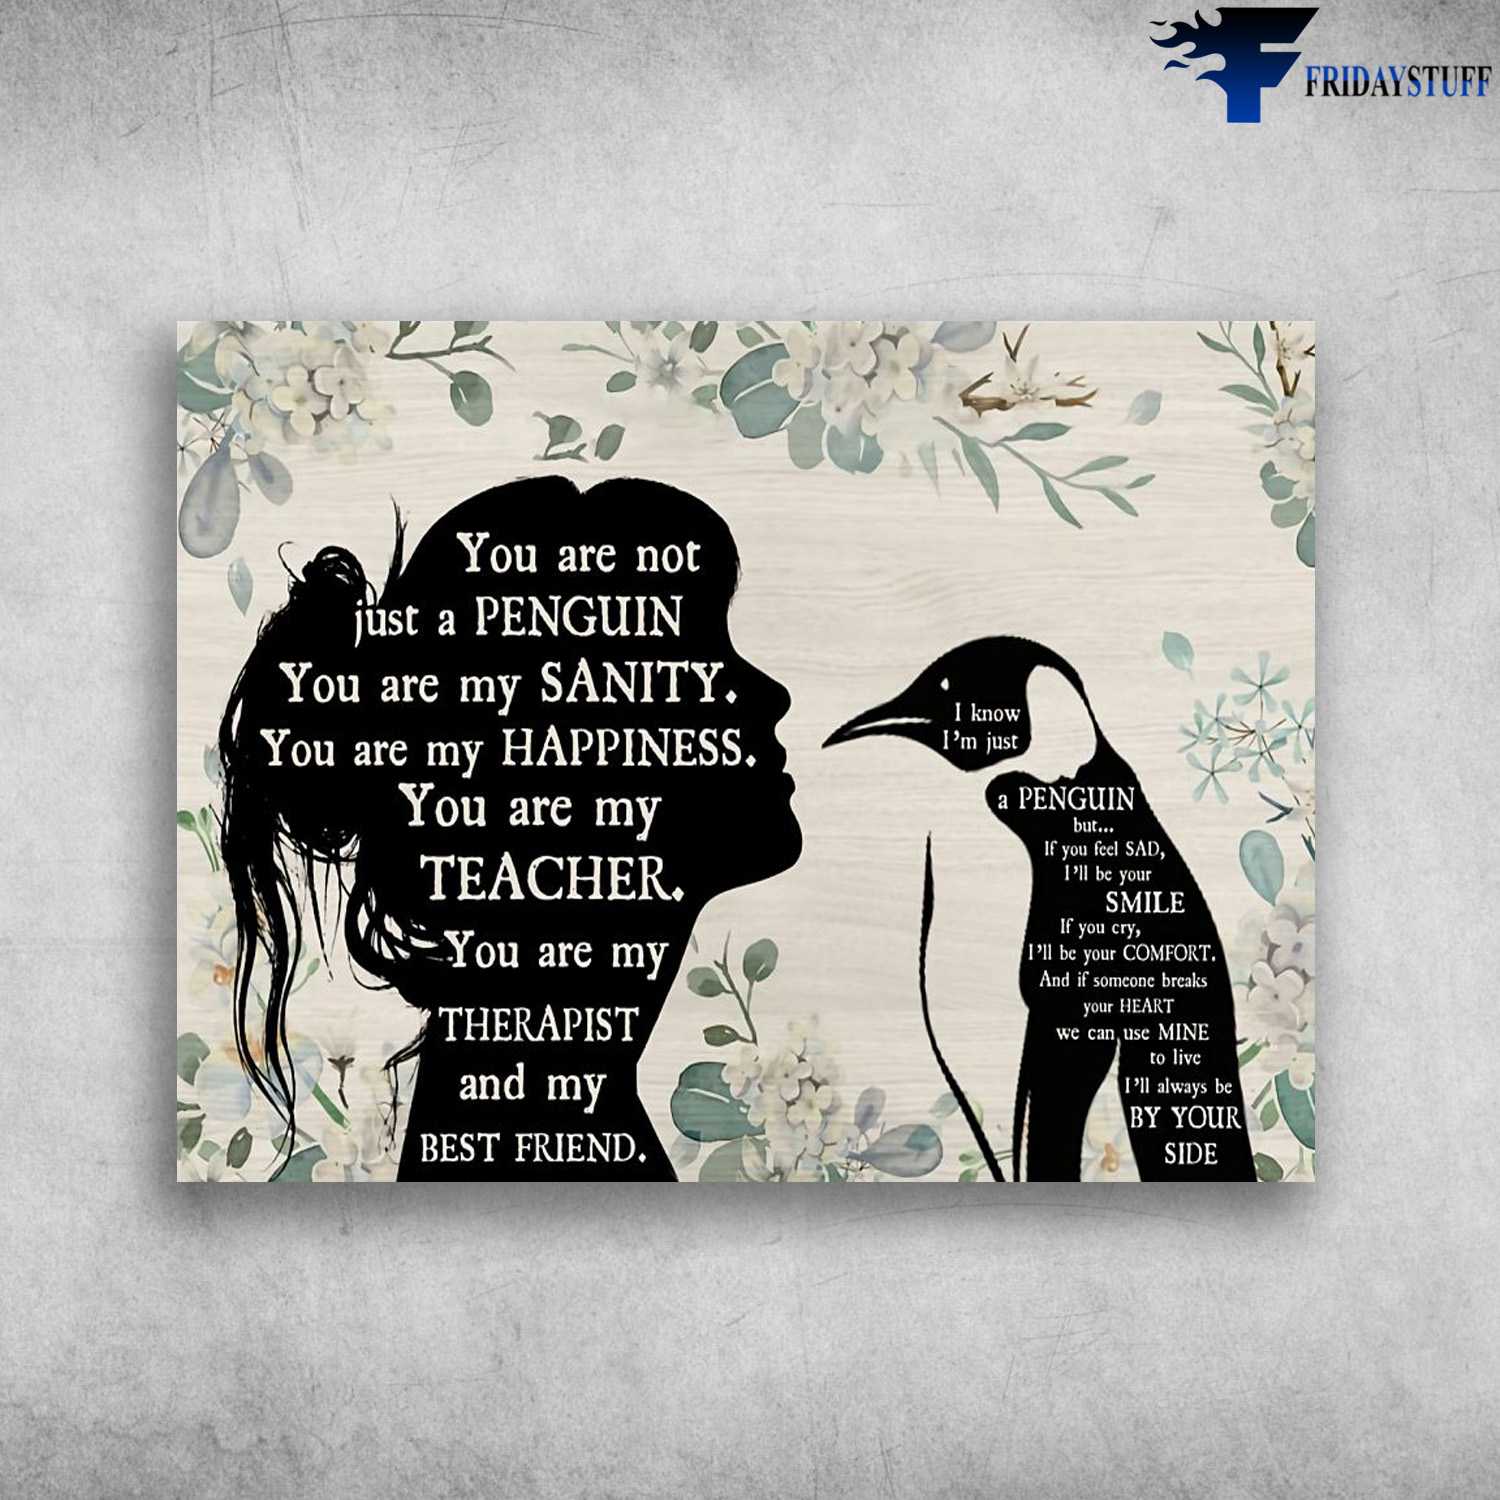 Penguin Lover, Penguin Poster, You Are Not Just A Penguin, You Are My Sanity, You Are My Happiness, You Are My Teacher, You Are My Therapist, And My Best Friend